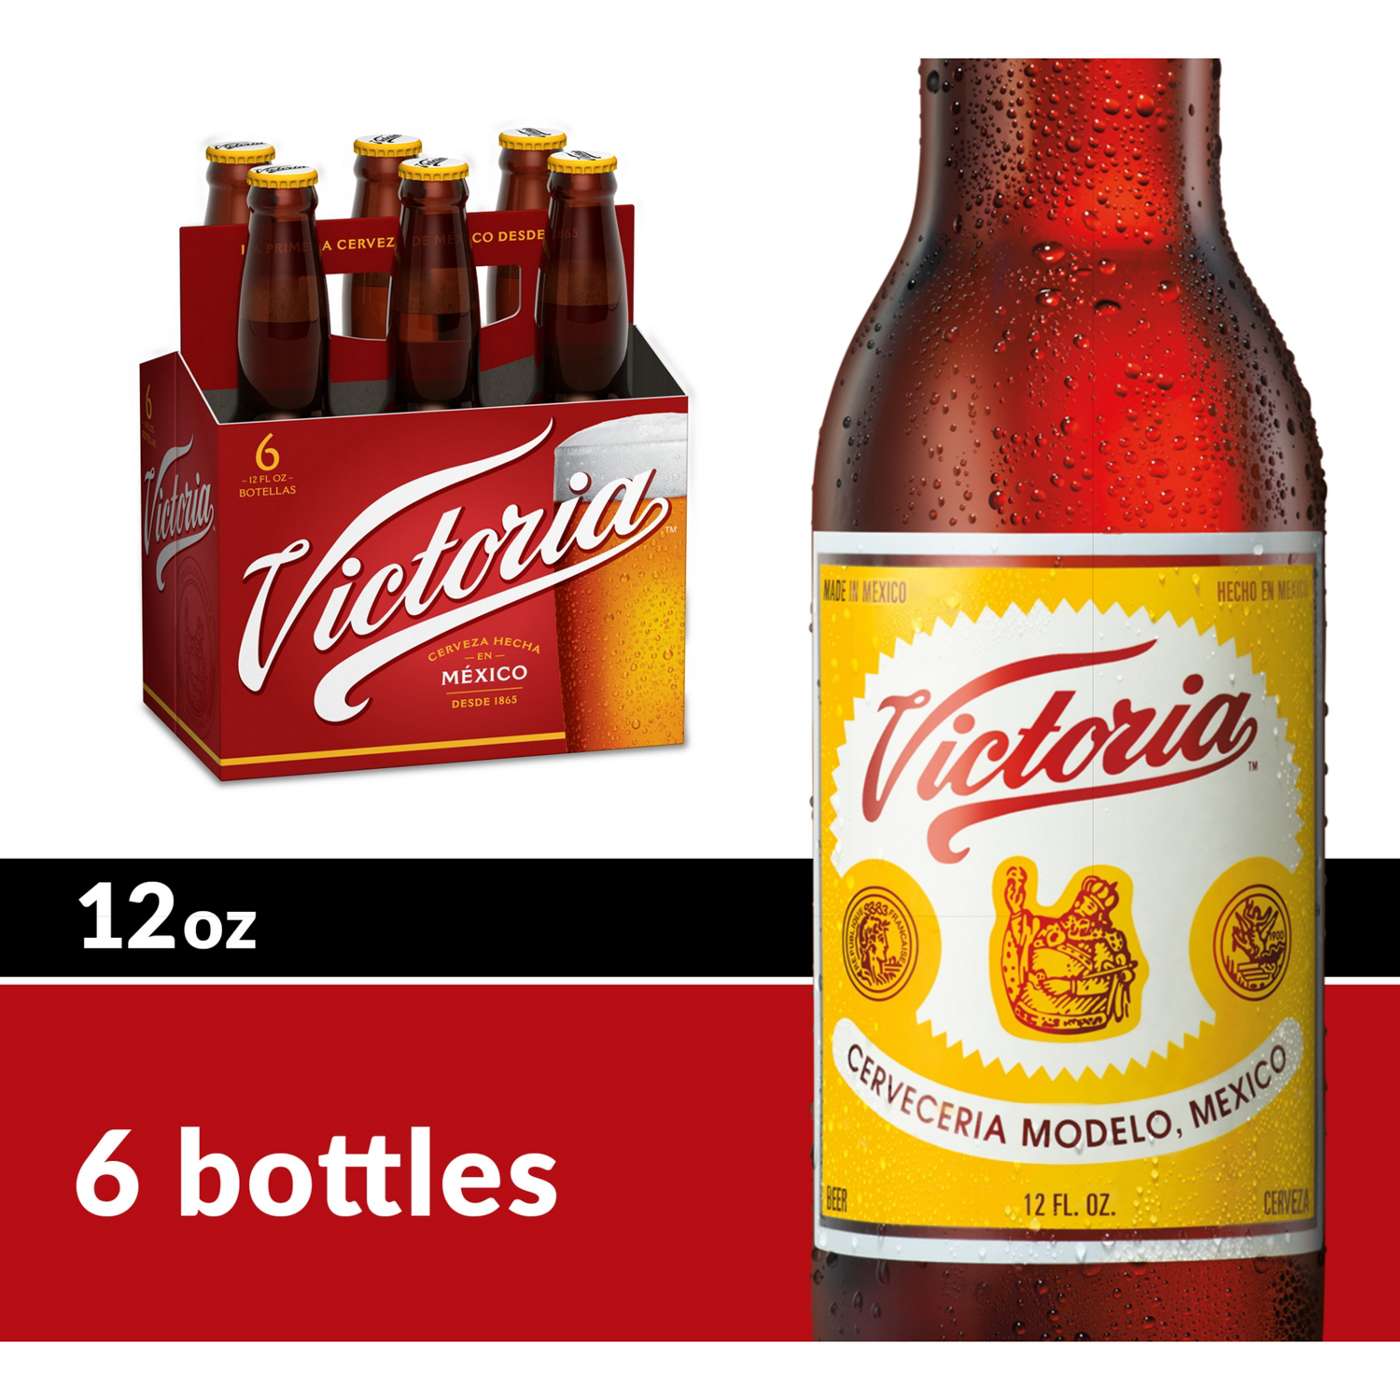 Victoria Amber Lager Mexican Beer 12 Oz Bottles 6 Pk Shop Beer At H E B